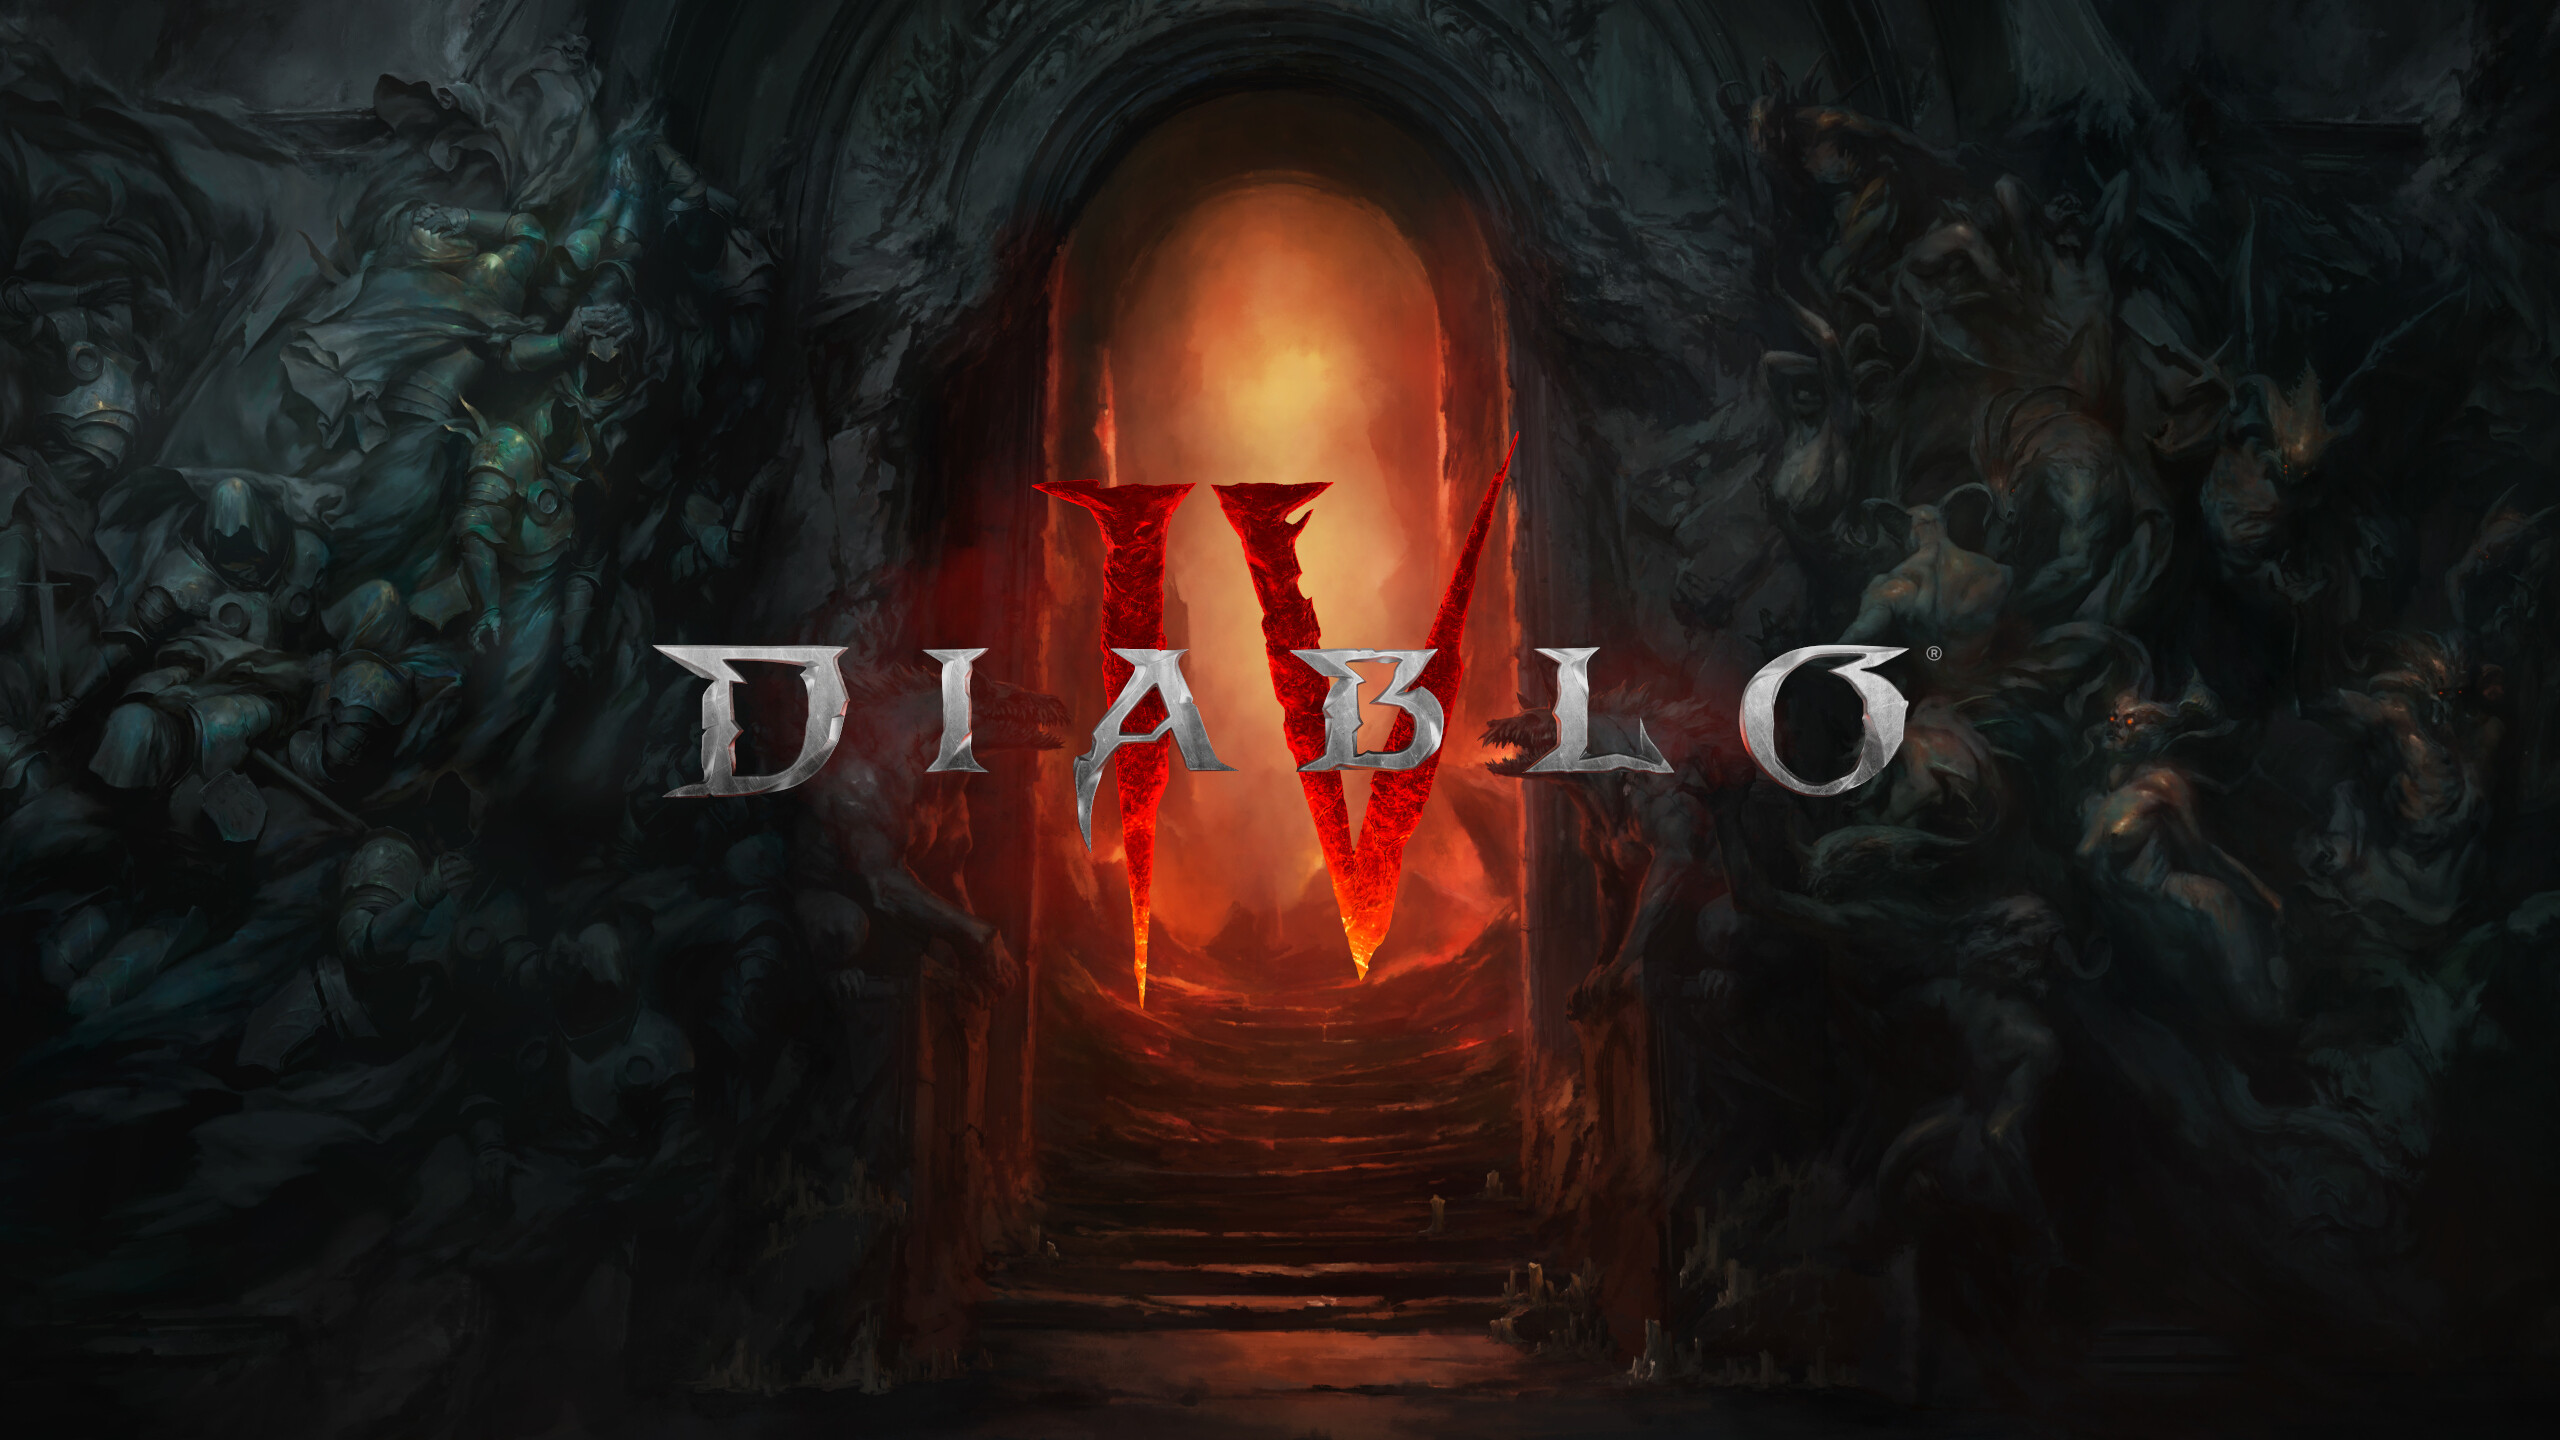 Diablo: The universe of the game is divided into three realms: the High Heavens, the Burning Hells, and the human world of Sanctuary. 2560x1440 HD Background.